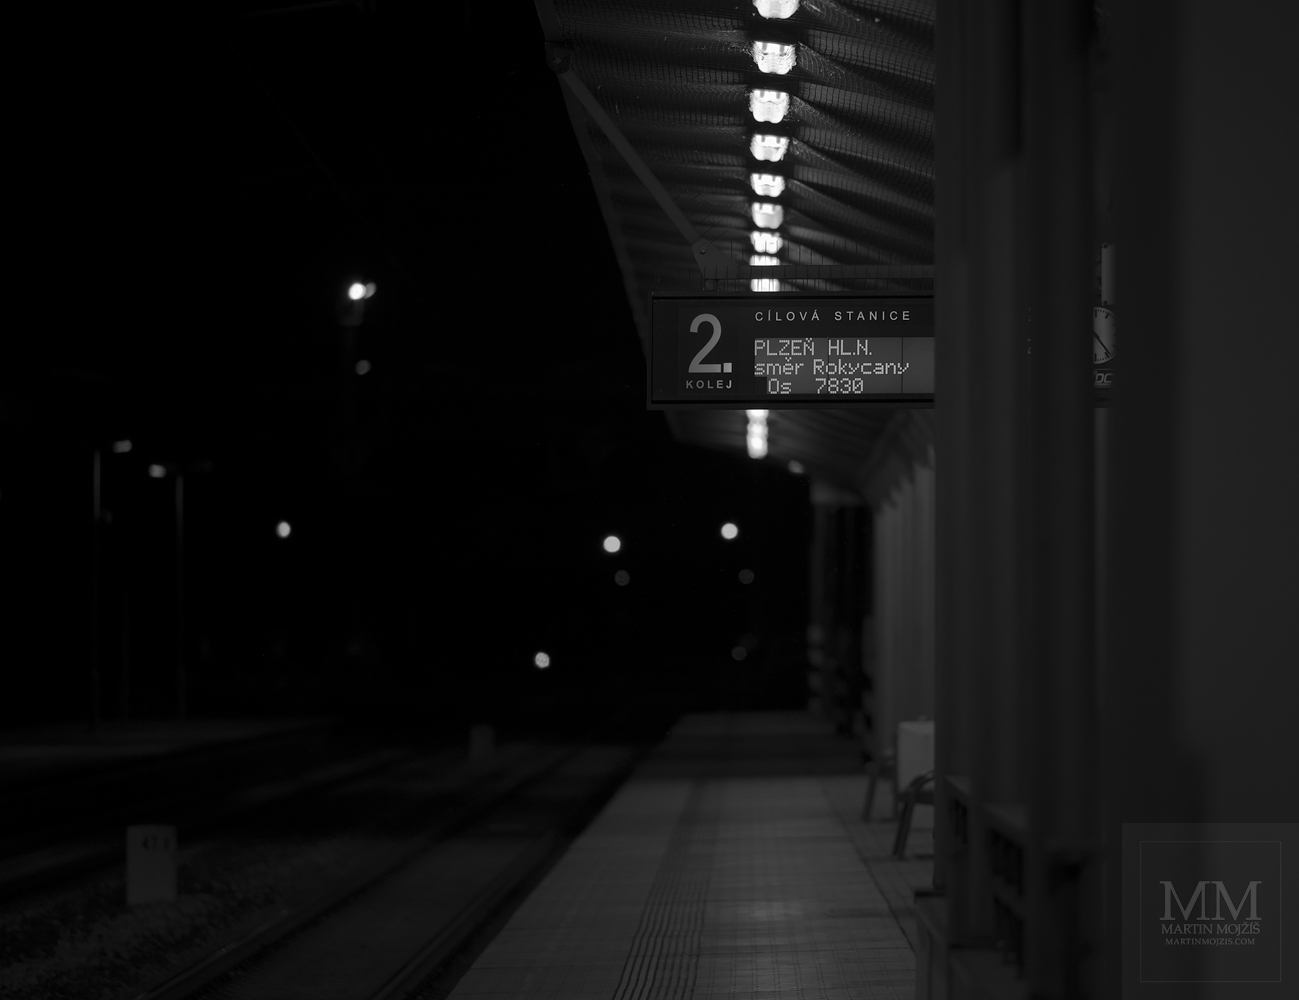 Railway station at night. Fine art black and white photograph TO THE PILSEN, photographed by Martin Mojzis.